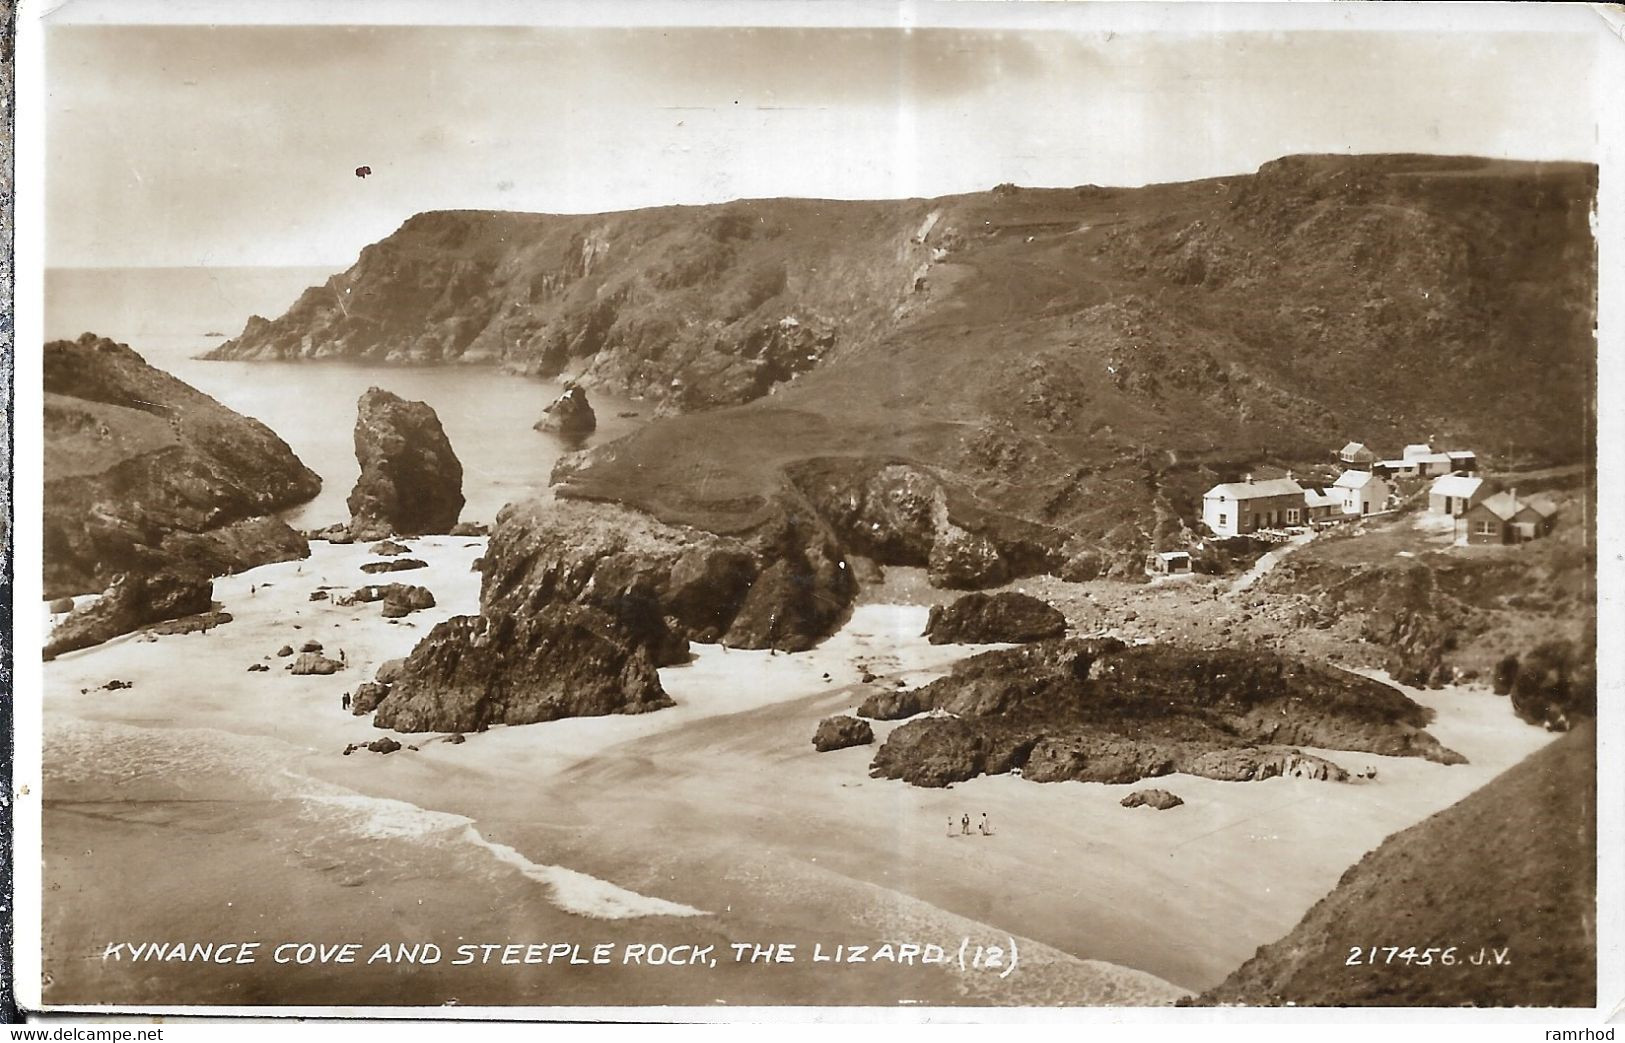 THE LIZARD, Kynance Cove And Steeple Rock (Publisher - Valentine's) Date - Aug 1946 Used - Land's End